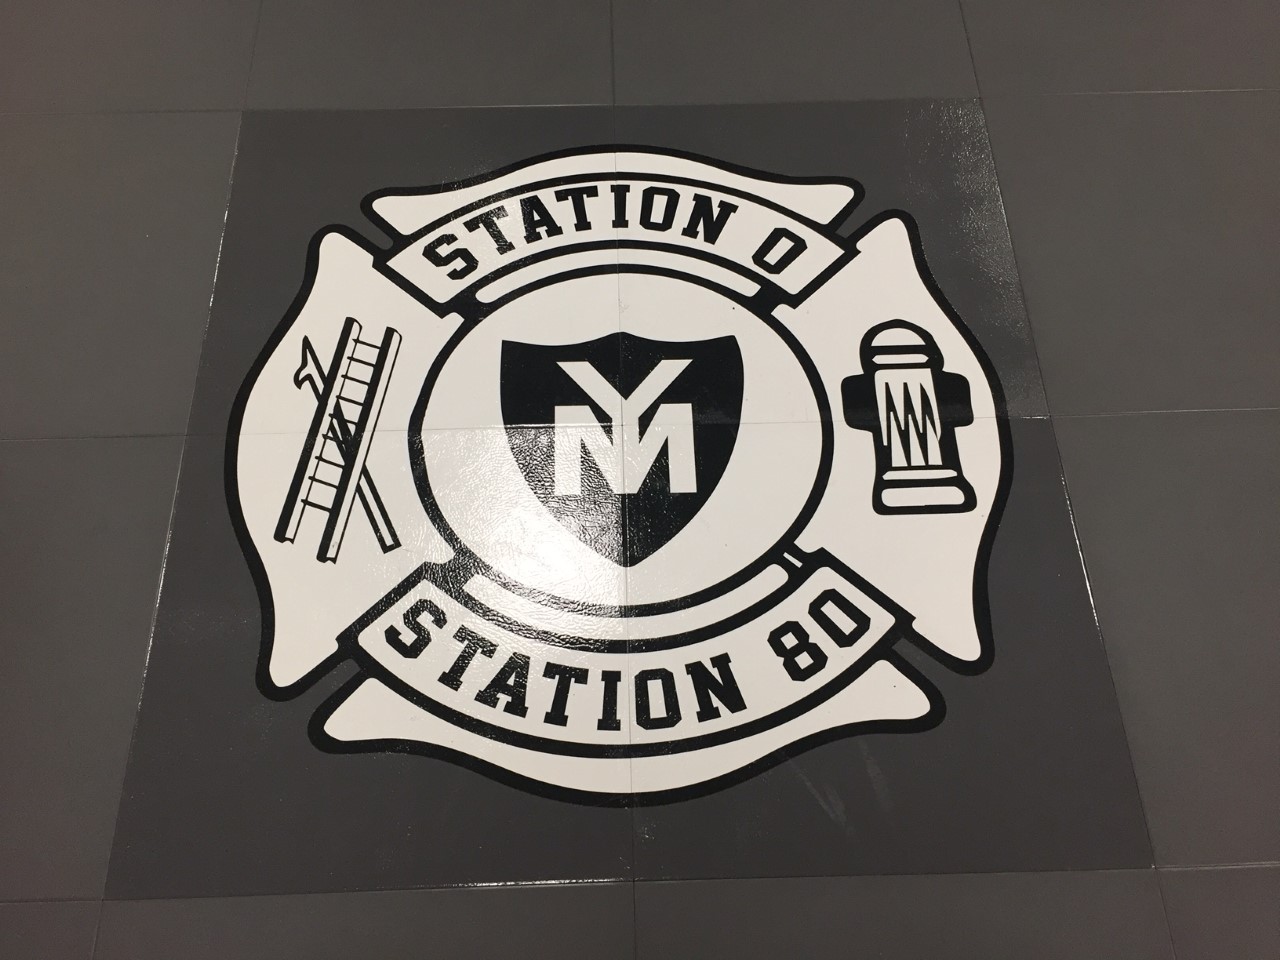 A sticker of the station 8 0 fire department.